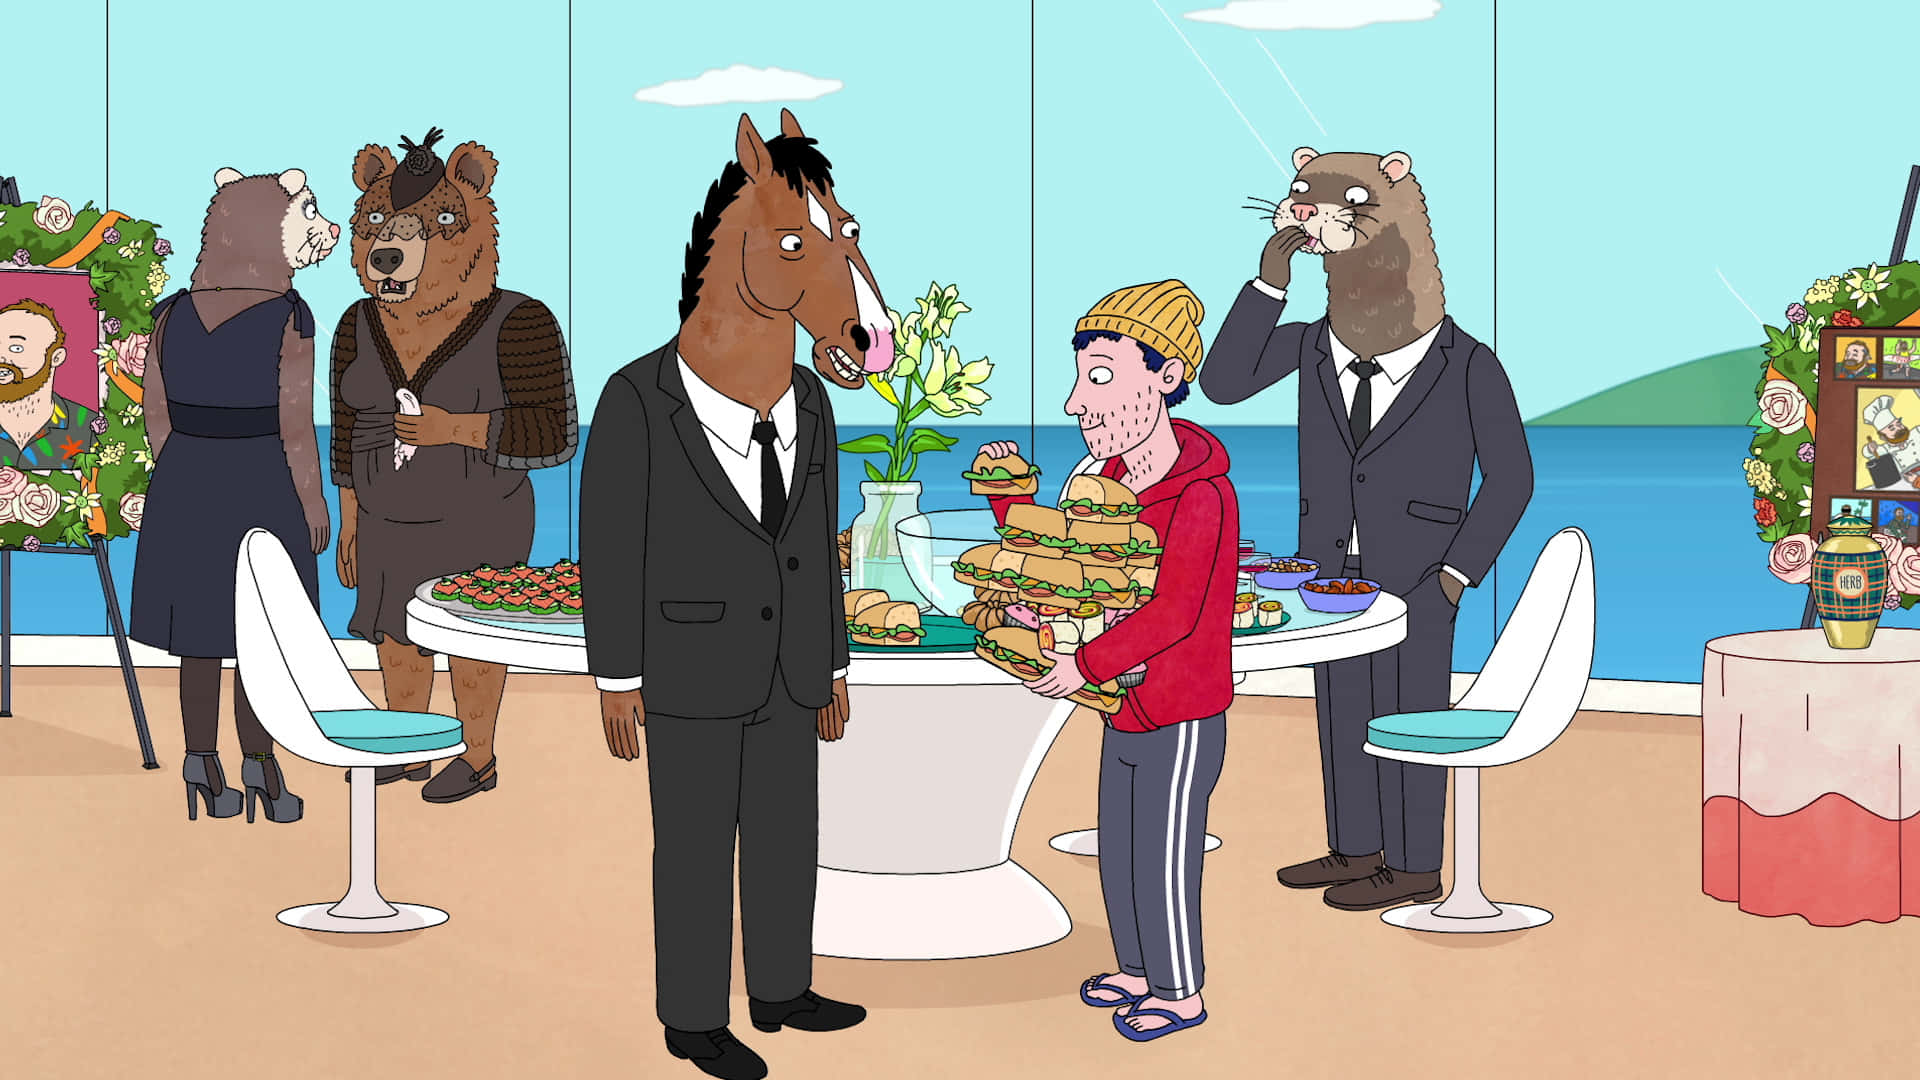 Bojack Horseman - The Equally Troublesome and Entertaining Cartoon